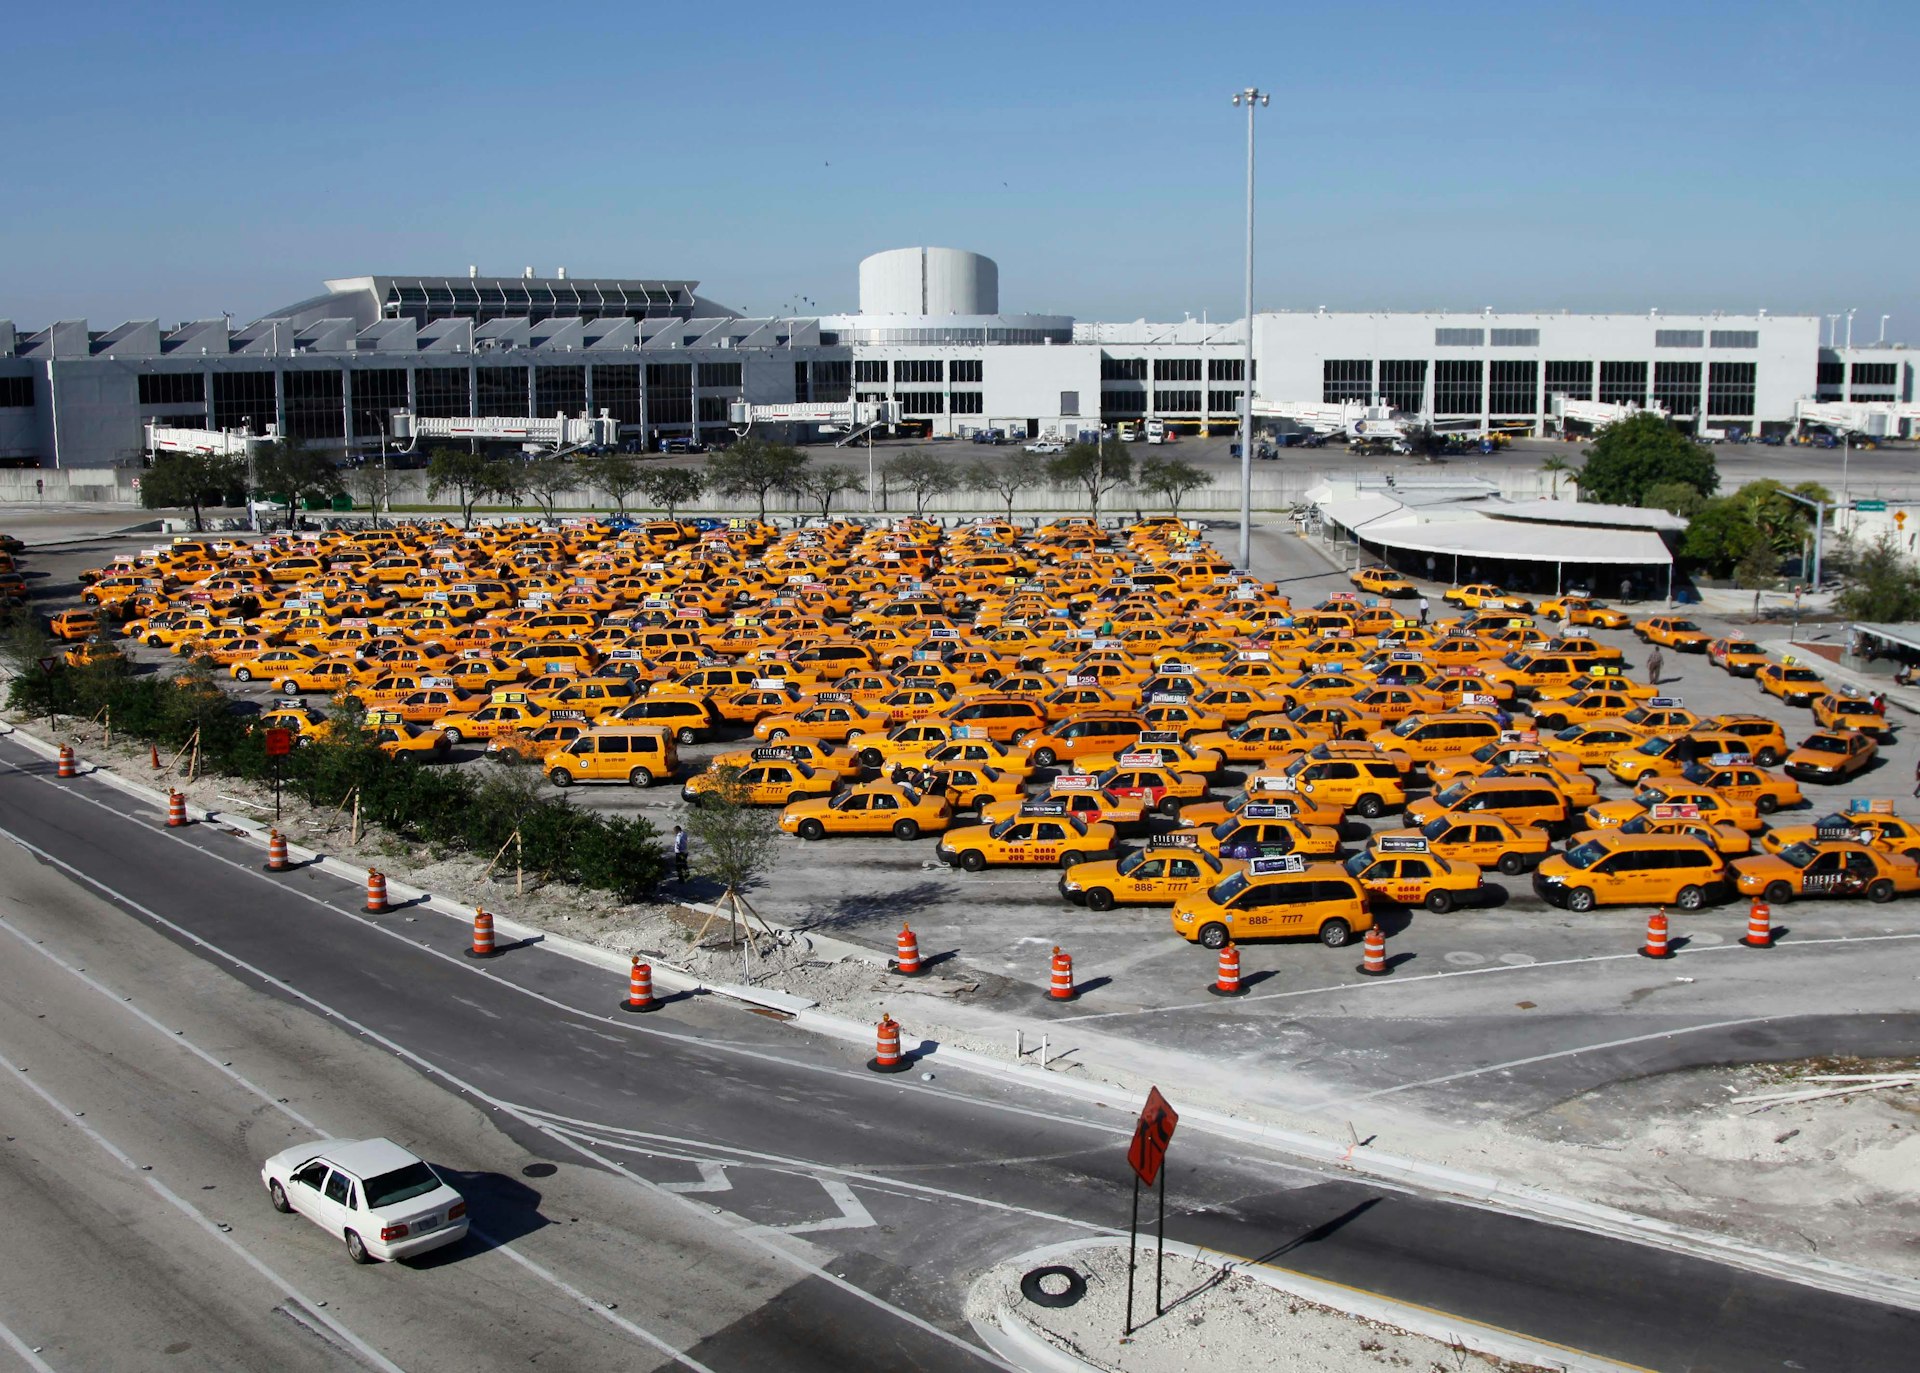 Ranks of yellow taxis at Miami International Airport